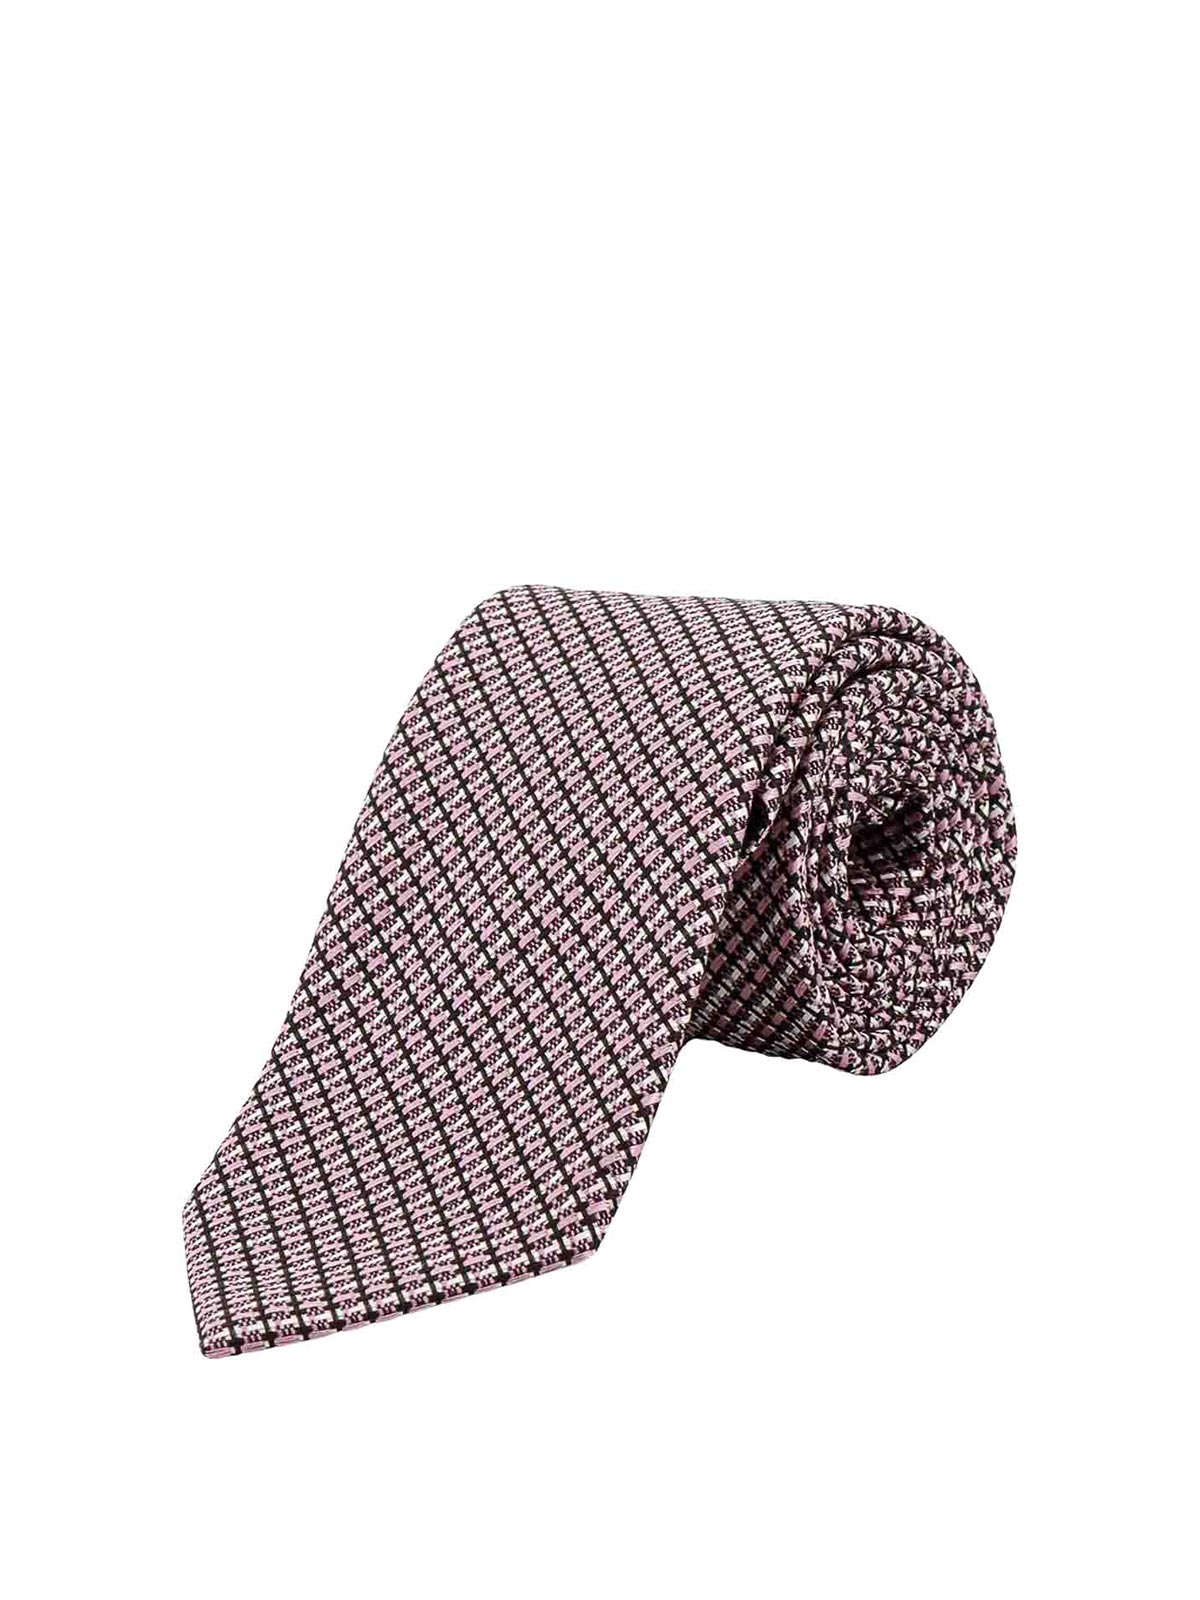 Shop Tom Ford Corbata - Color Carne Y Neutral In Nude & Neutrals